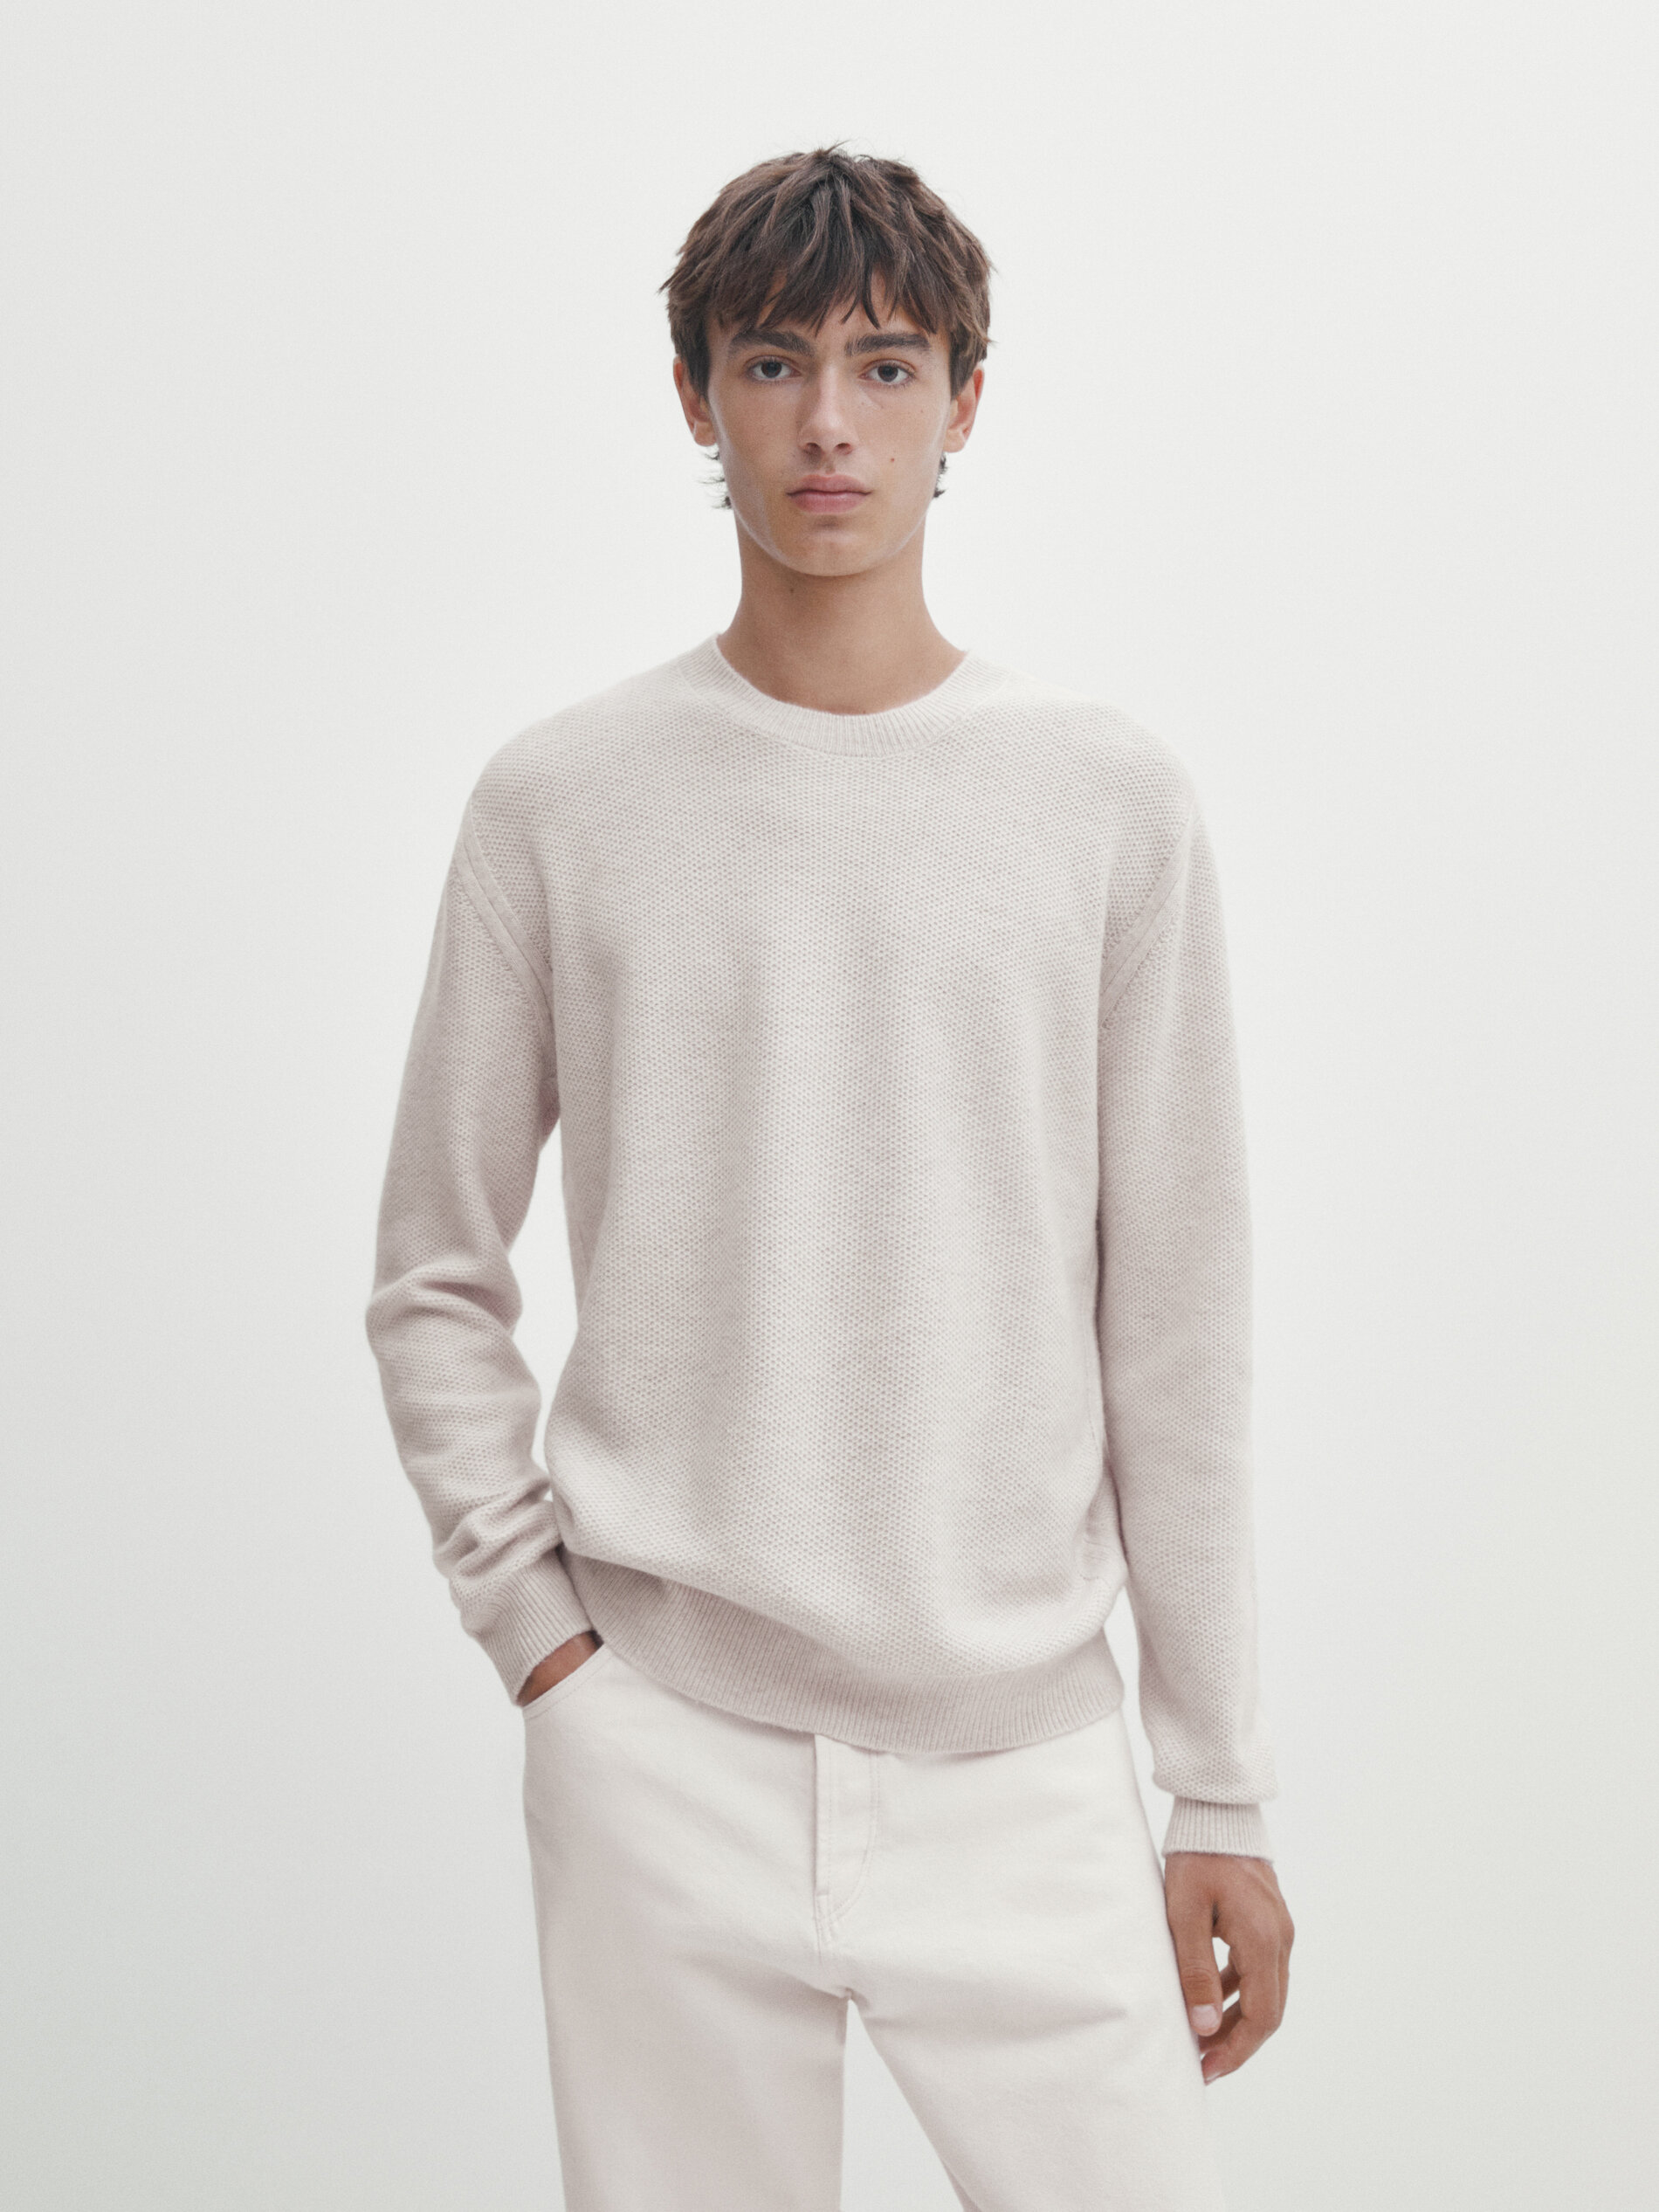 Wool and cashmere blend smocked knit sweater - Massimo Dutti